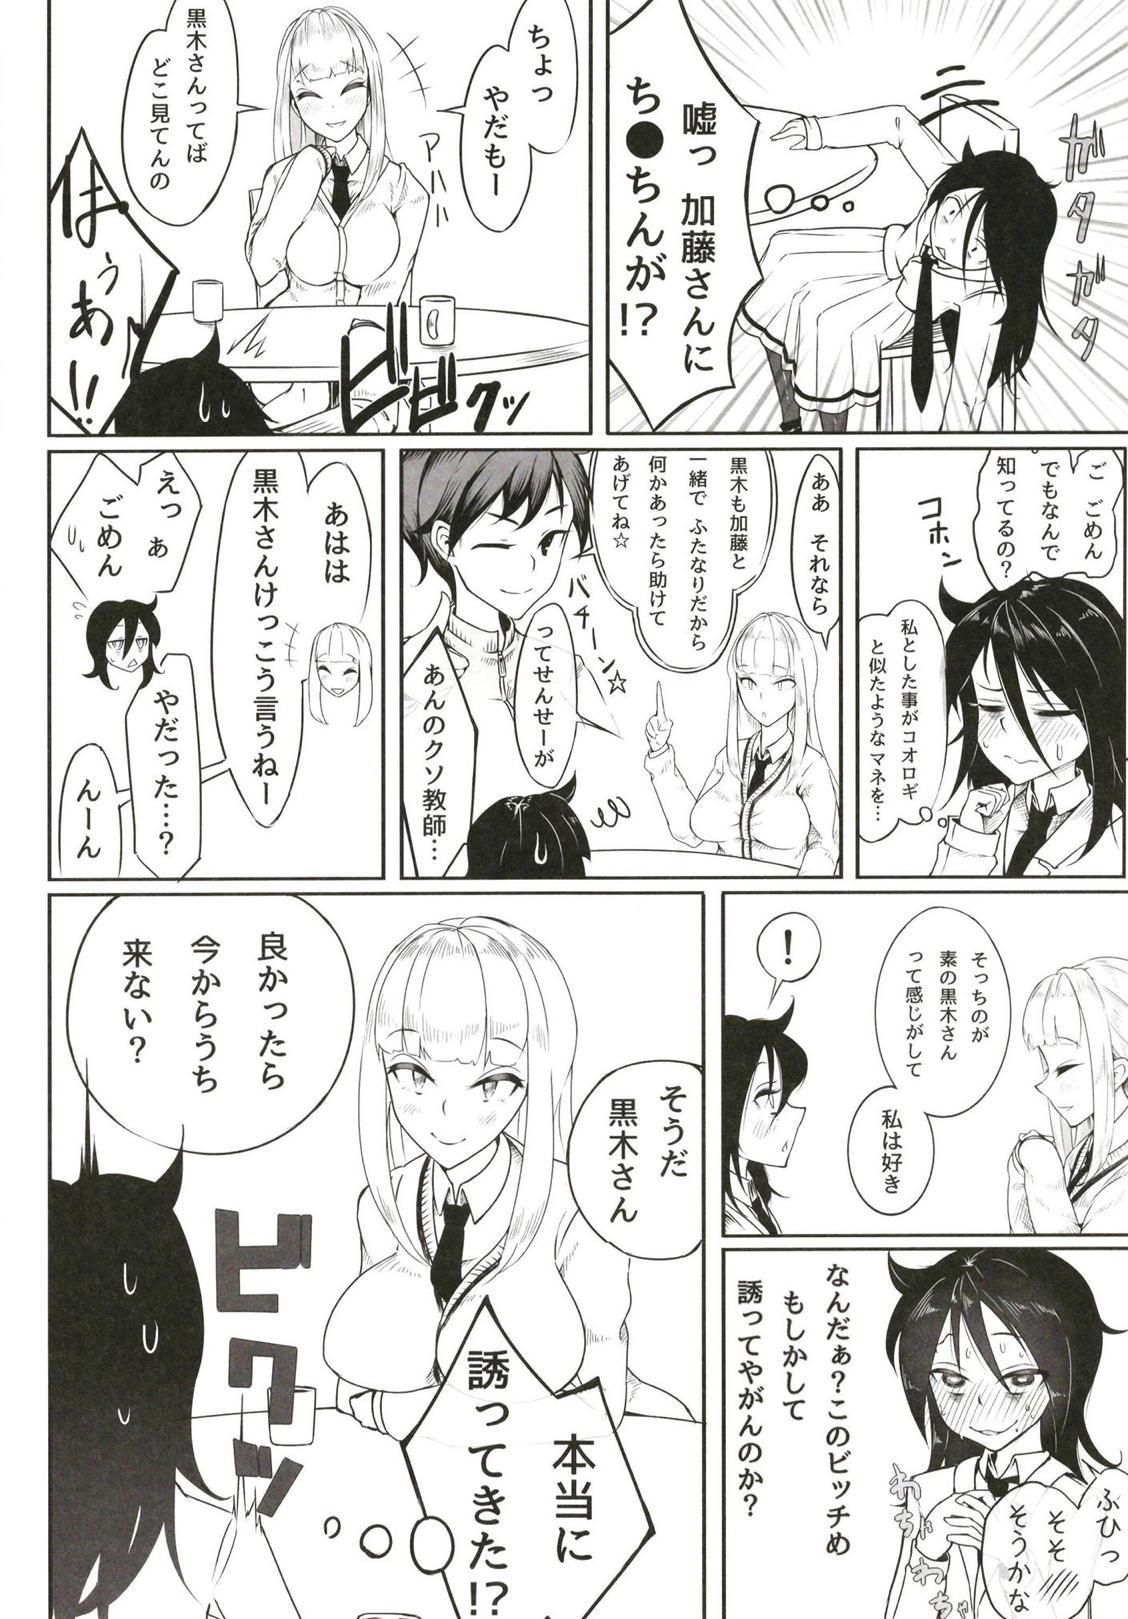 Gostosa Okaa-san to Issho - Its not my fault that im not popular Vibrator - Page 5